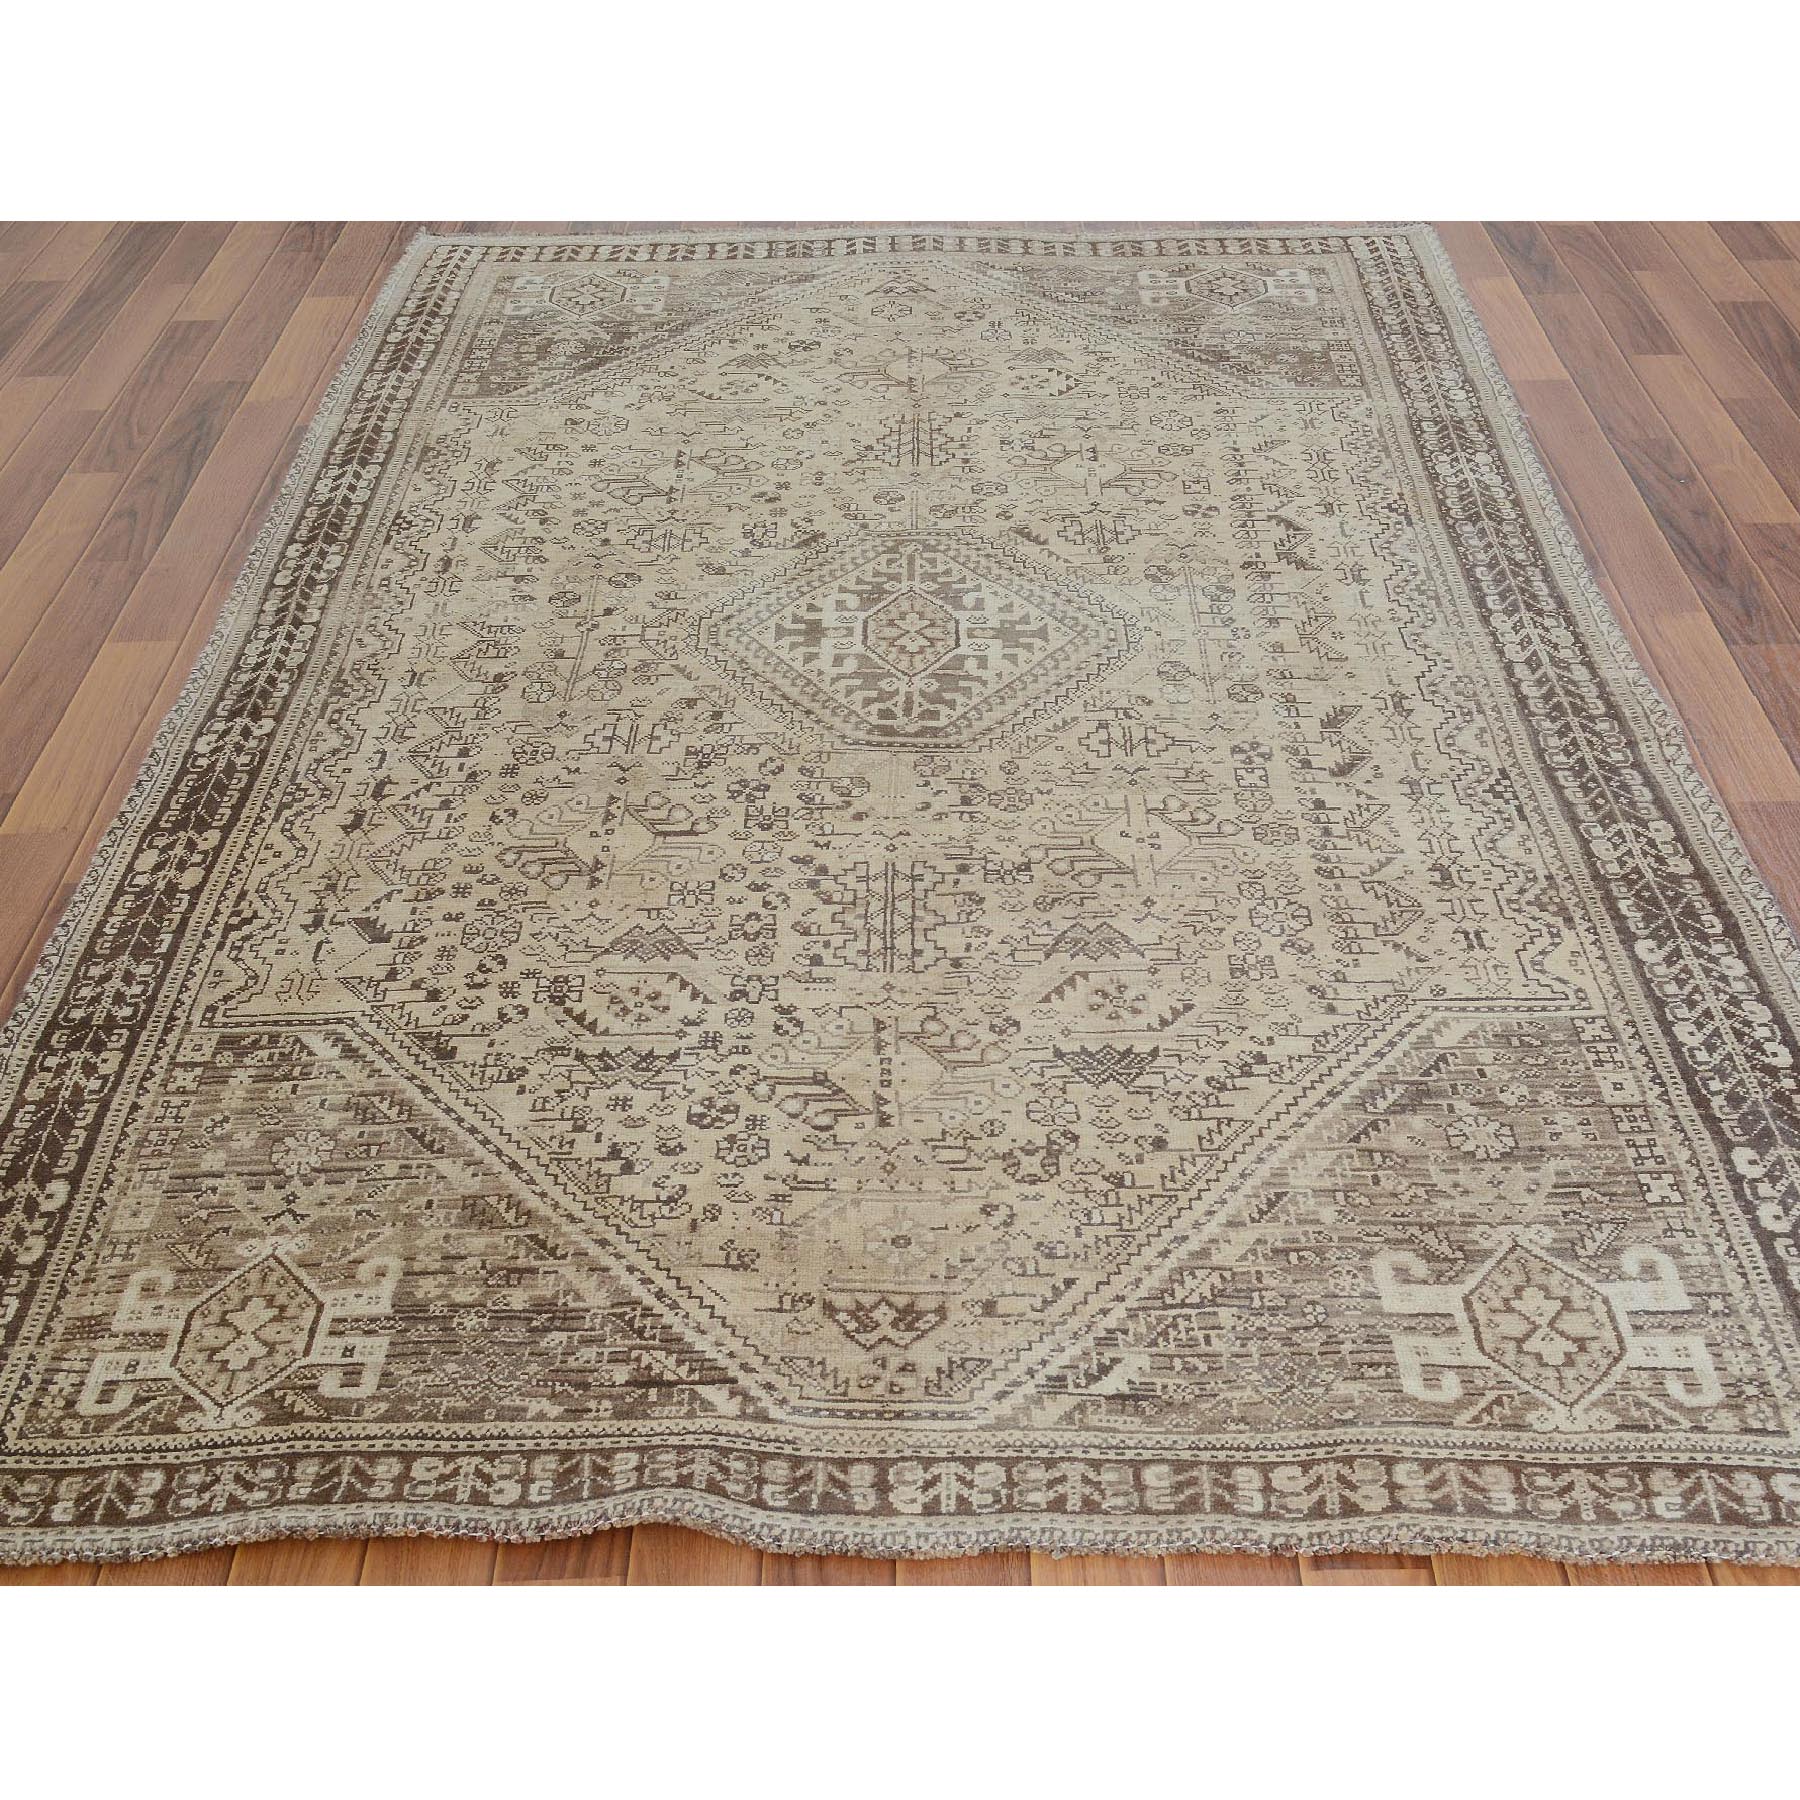 5-4 x8-7  Earth Tones Vintage and Worn Down Persian Qashqai Pure Wool Hand Knotted Oriental Rug 